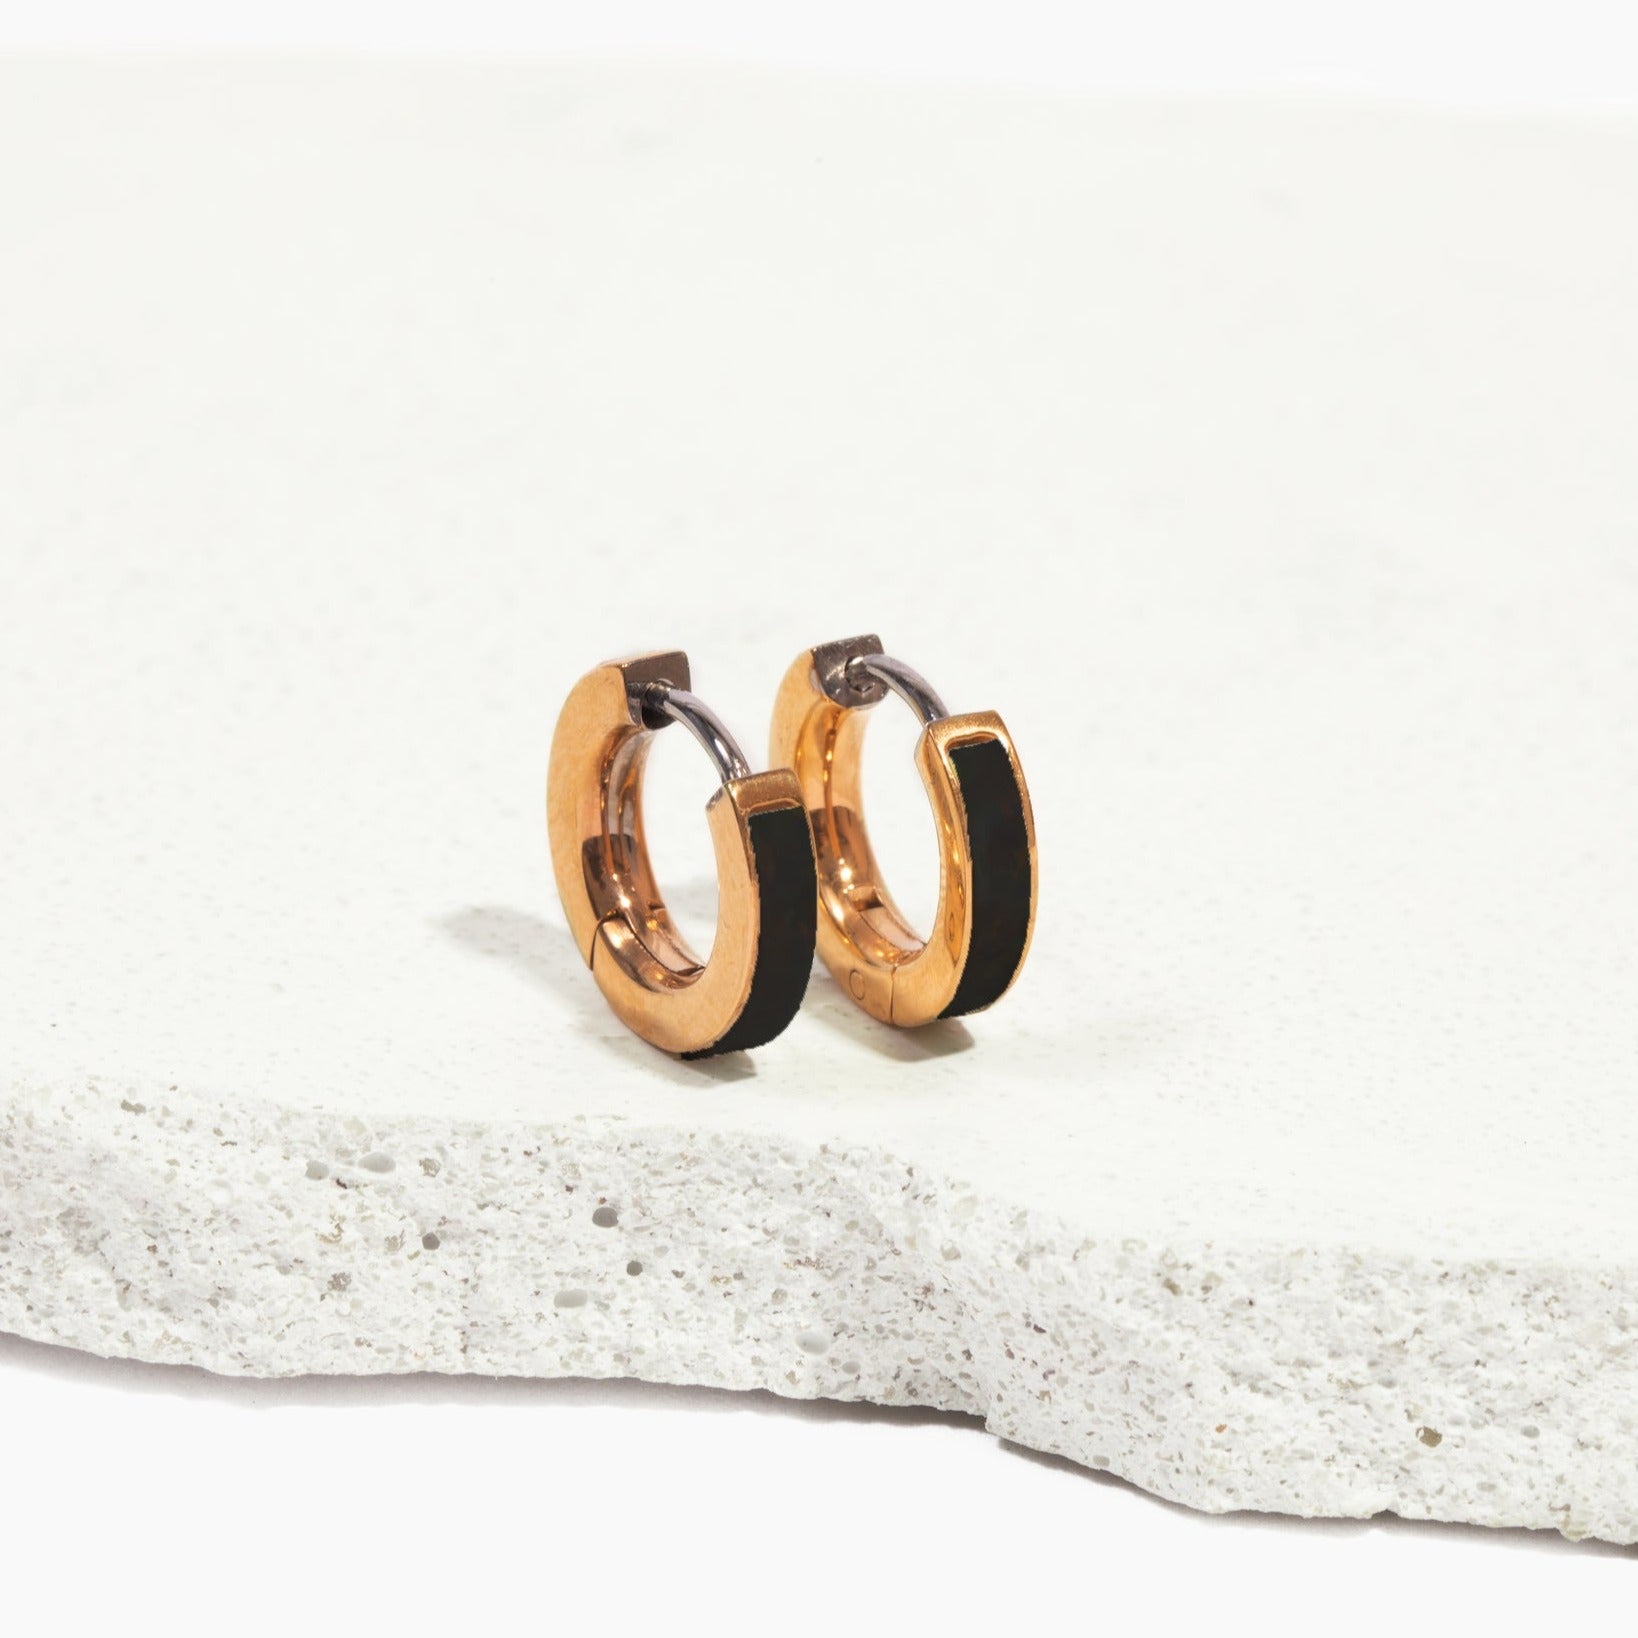 hypoallergenic gold and onyx hoop earrings made with nickel free titanium ||TLEHKenG